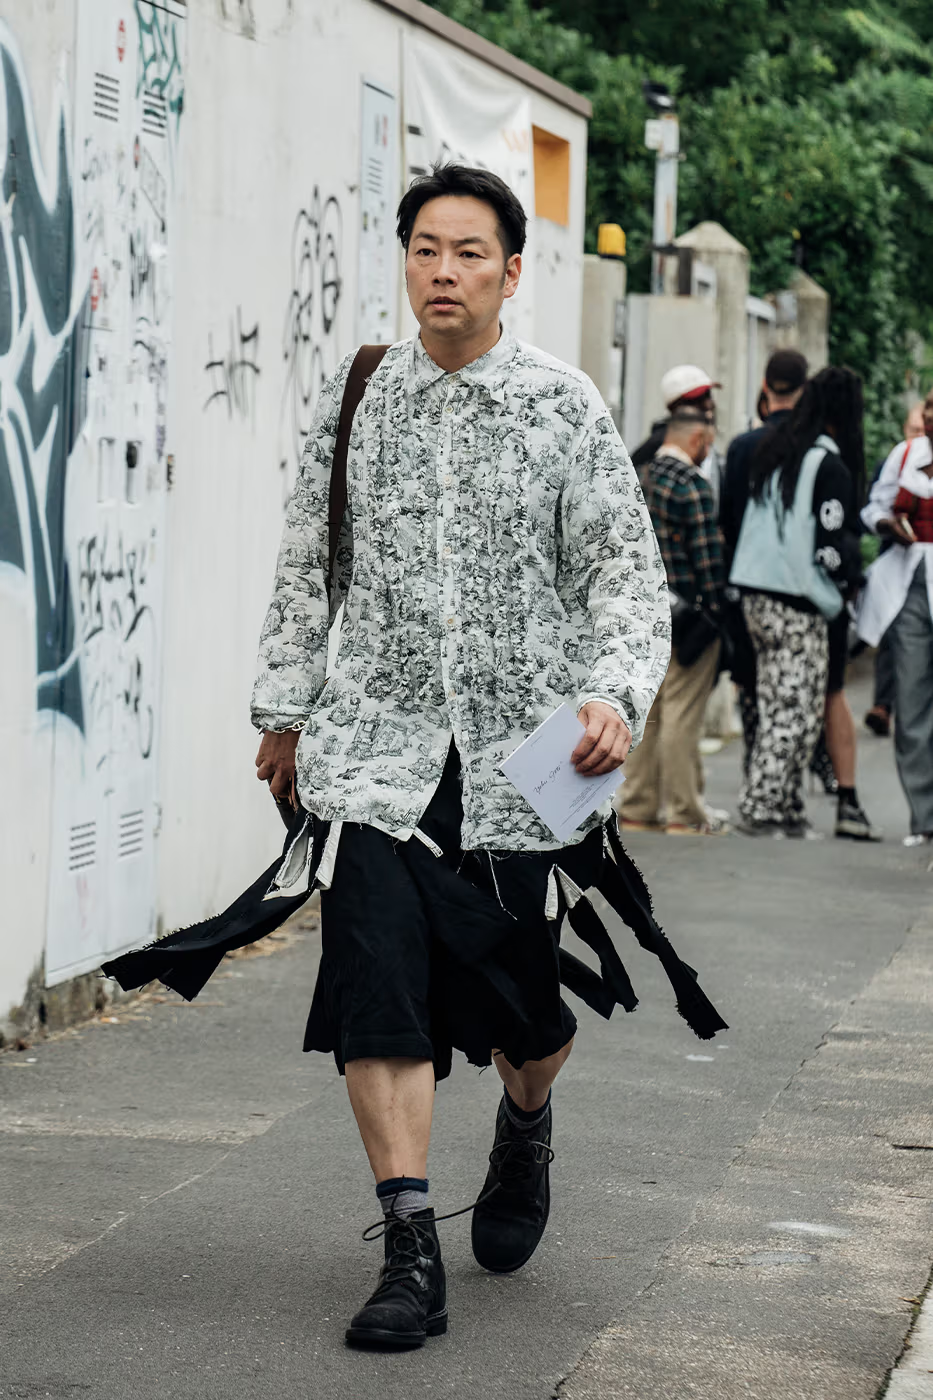 Another guy rocks a shirt for Milan Fashion Week 2023